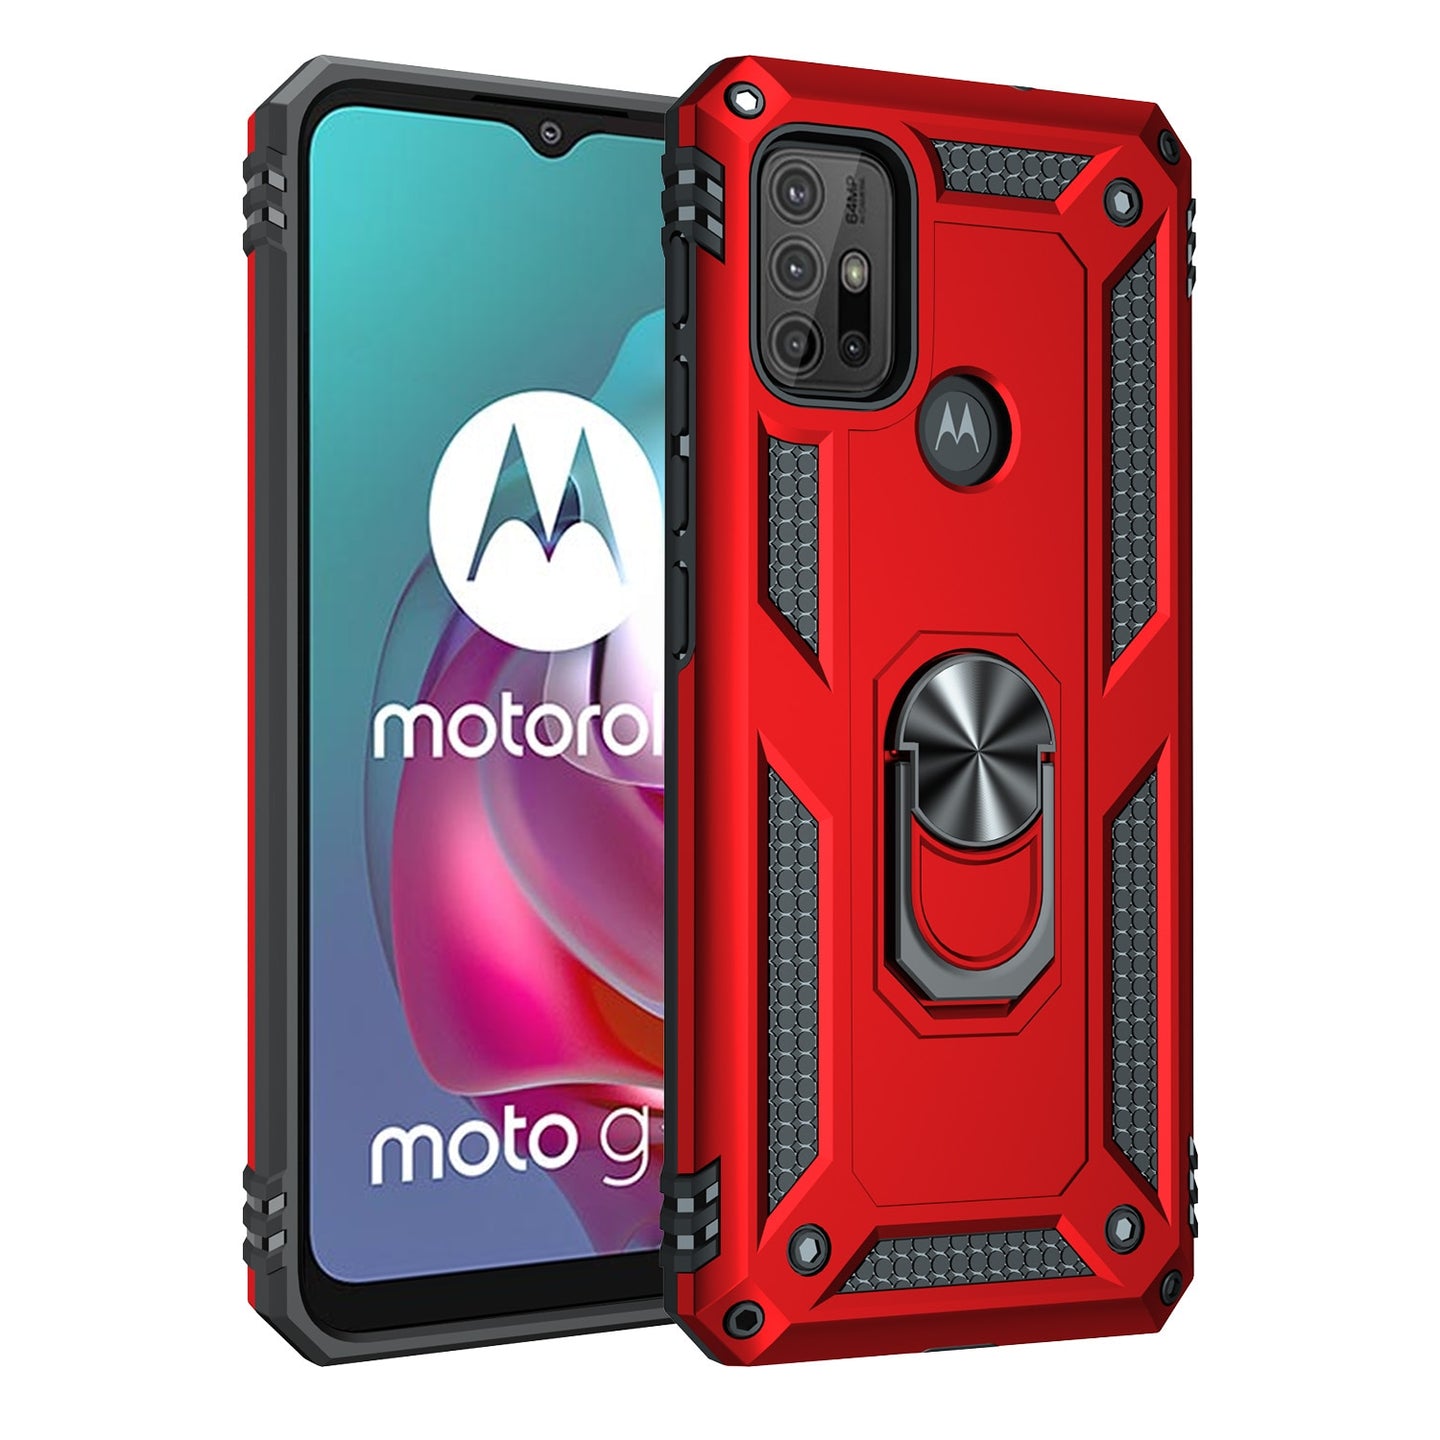 Shockproof Heavy-Duty Armor Case For Motorola With Magnetic Ring Kickstand